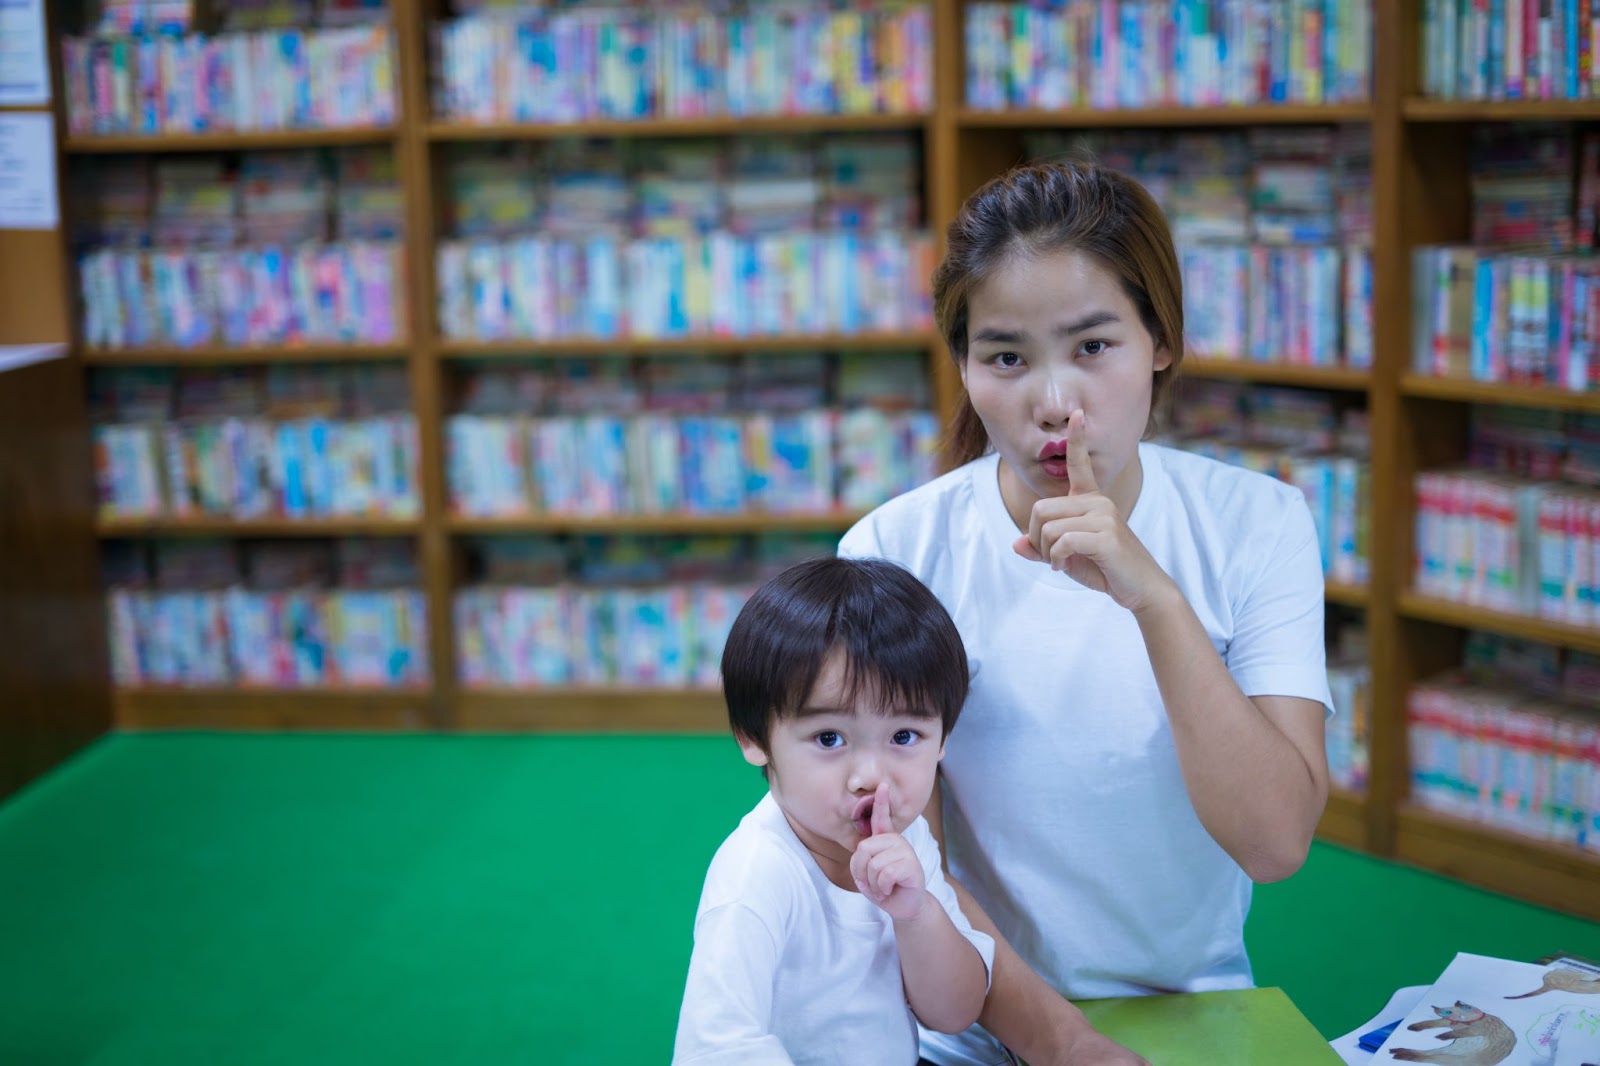 Asian teacher with little boy reading book and holding finger on lips making a silent gesture together in library.